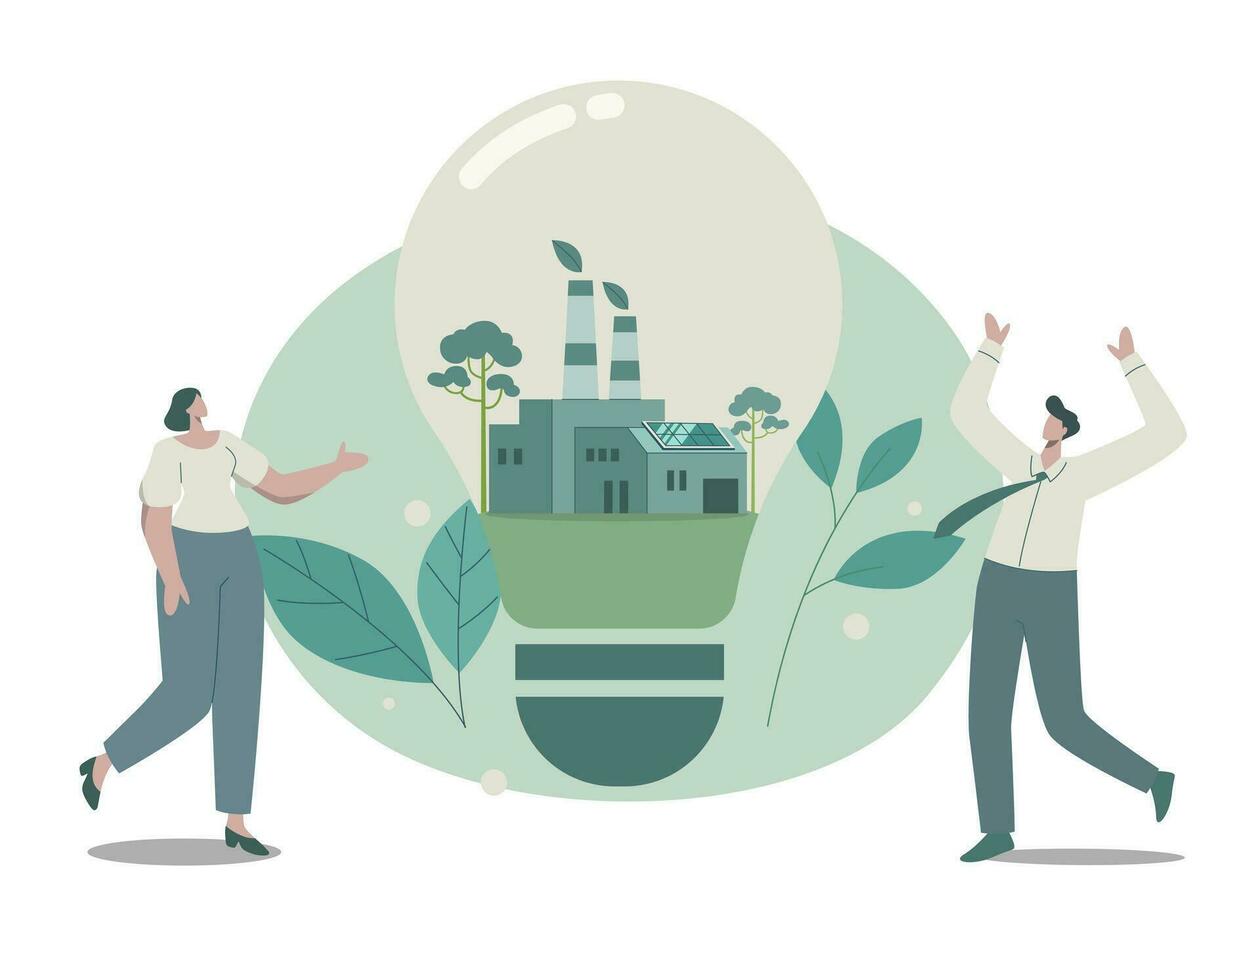 Environmental conservation factory in the light bulb, Alternative power supply, Clean green energy from renewable sources concept, Vector design illustration.